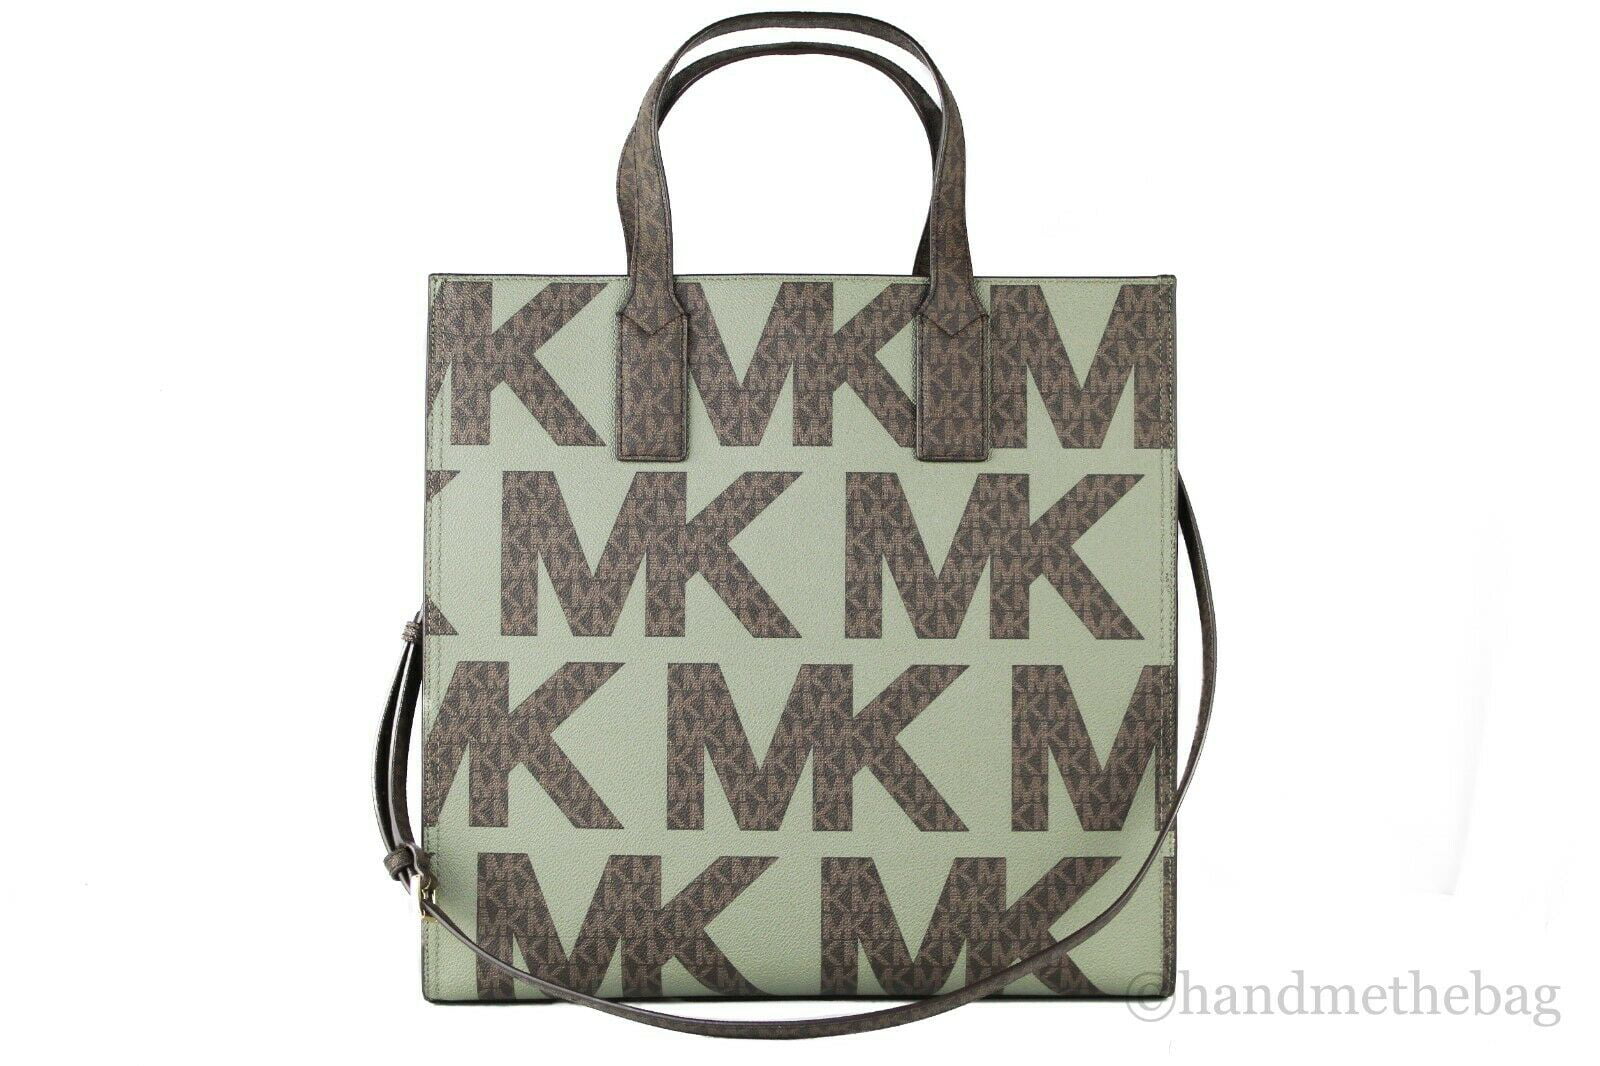 Michael Kors, Bags, Kenly Graphic Logo Tote Bag Mk Brown Only